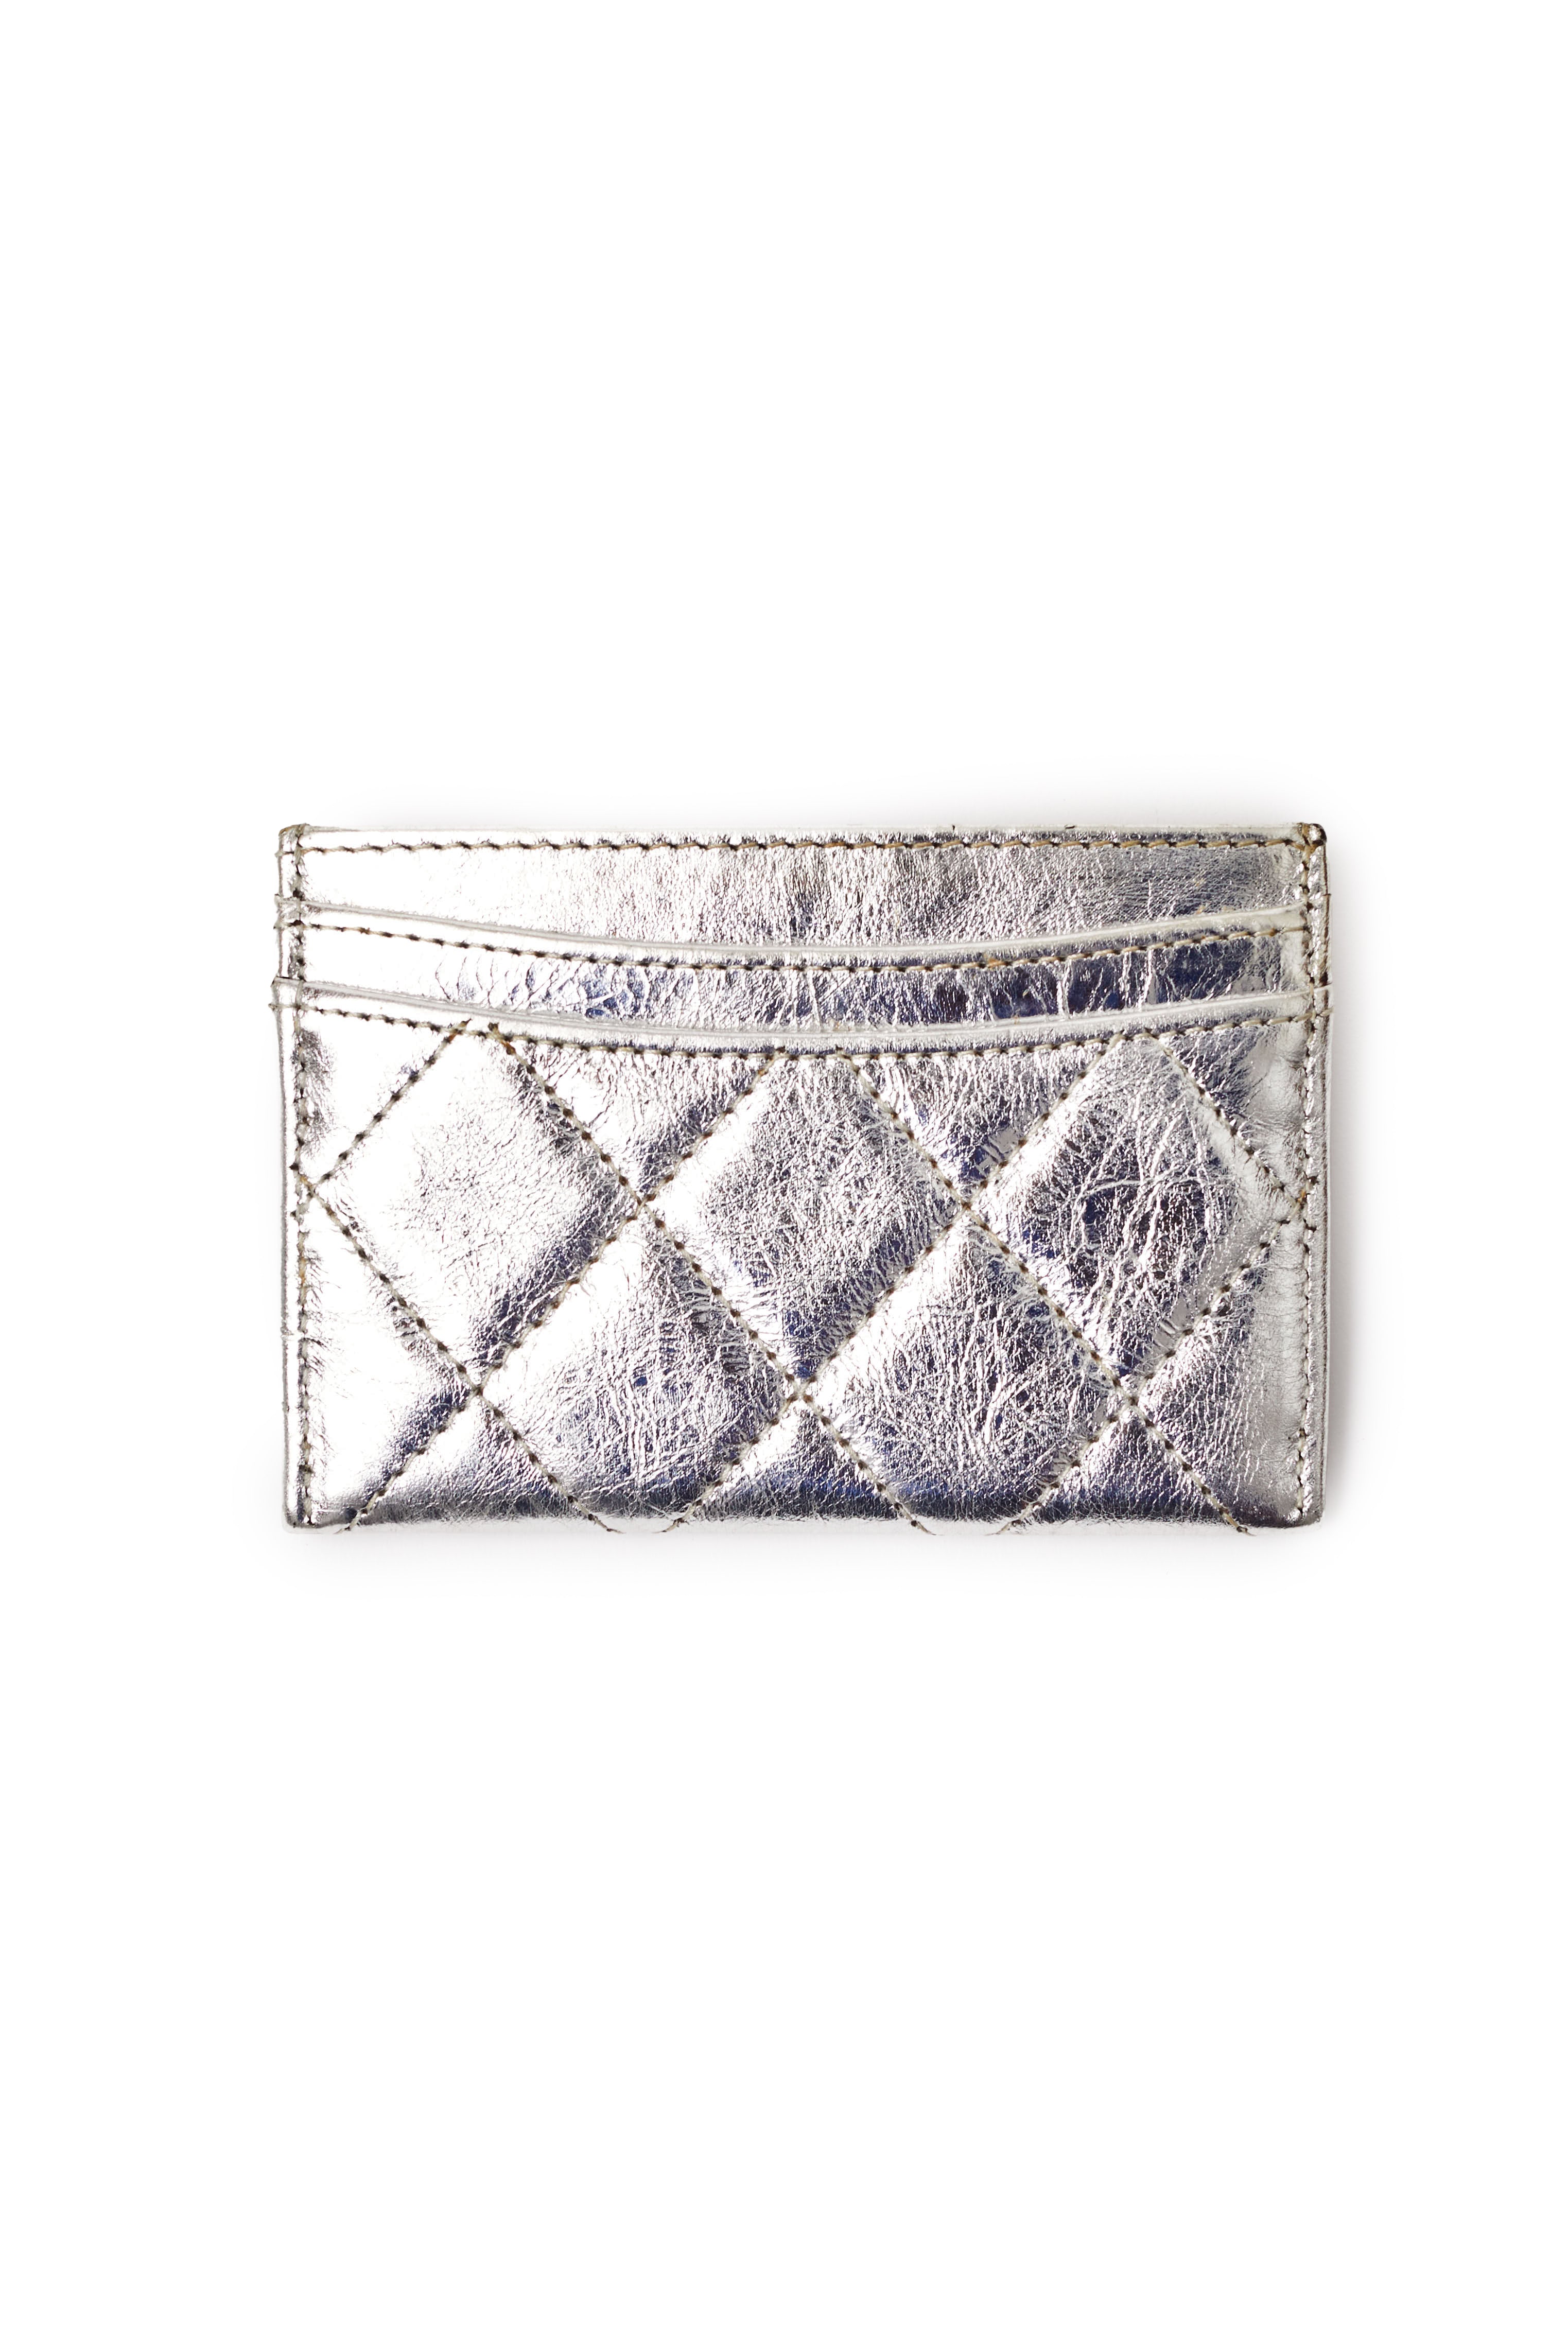 Chanel <br> c2007 2.55 silver metallic leather quilted cardholder